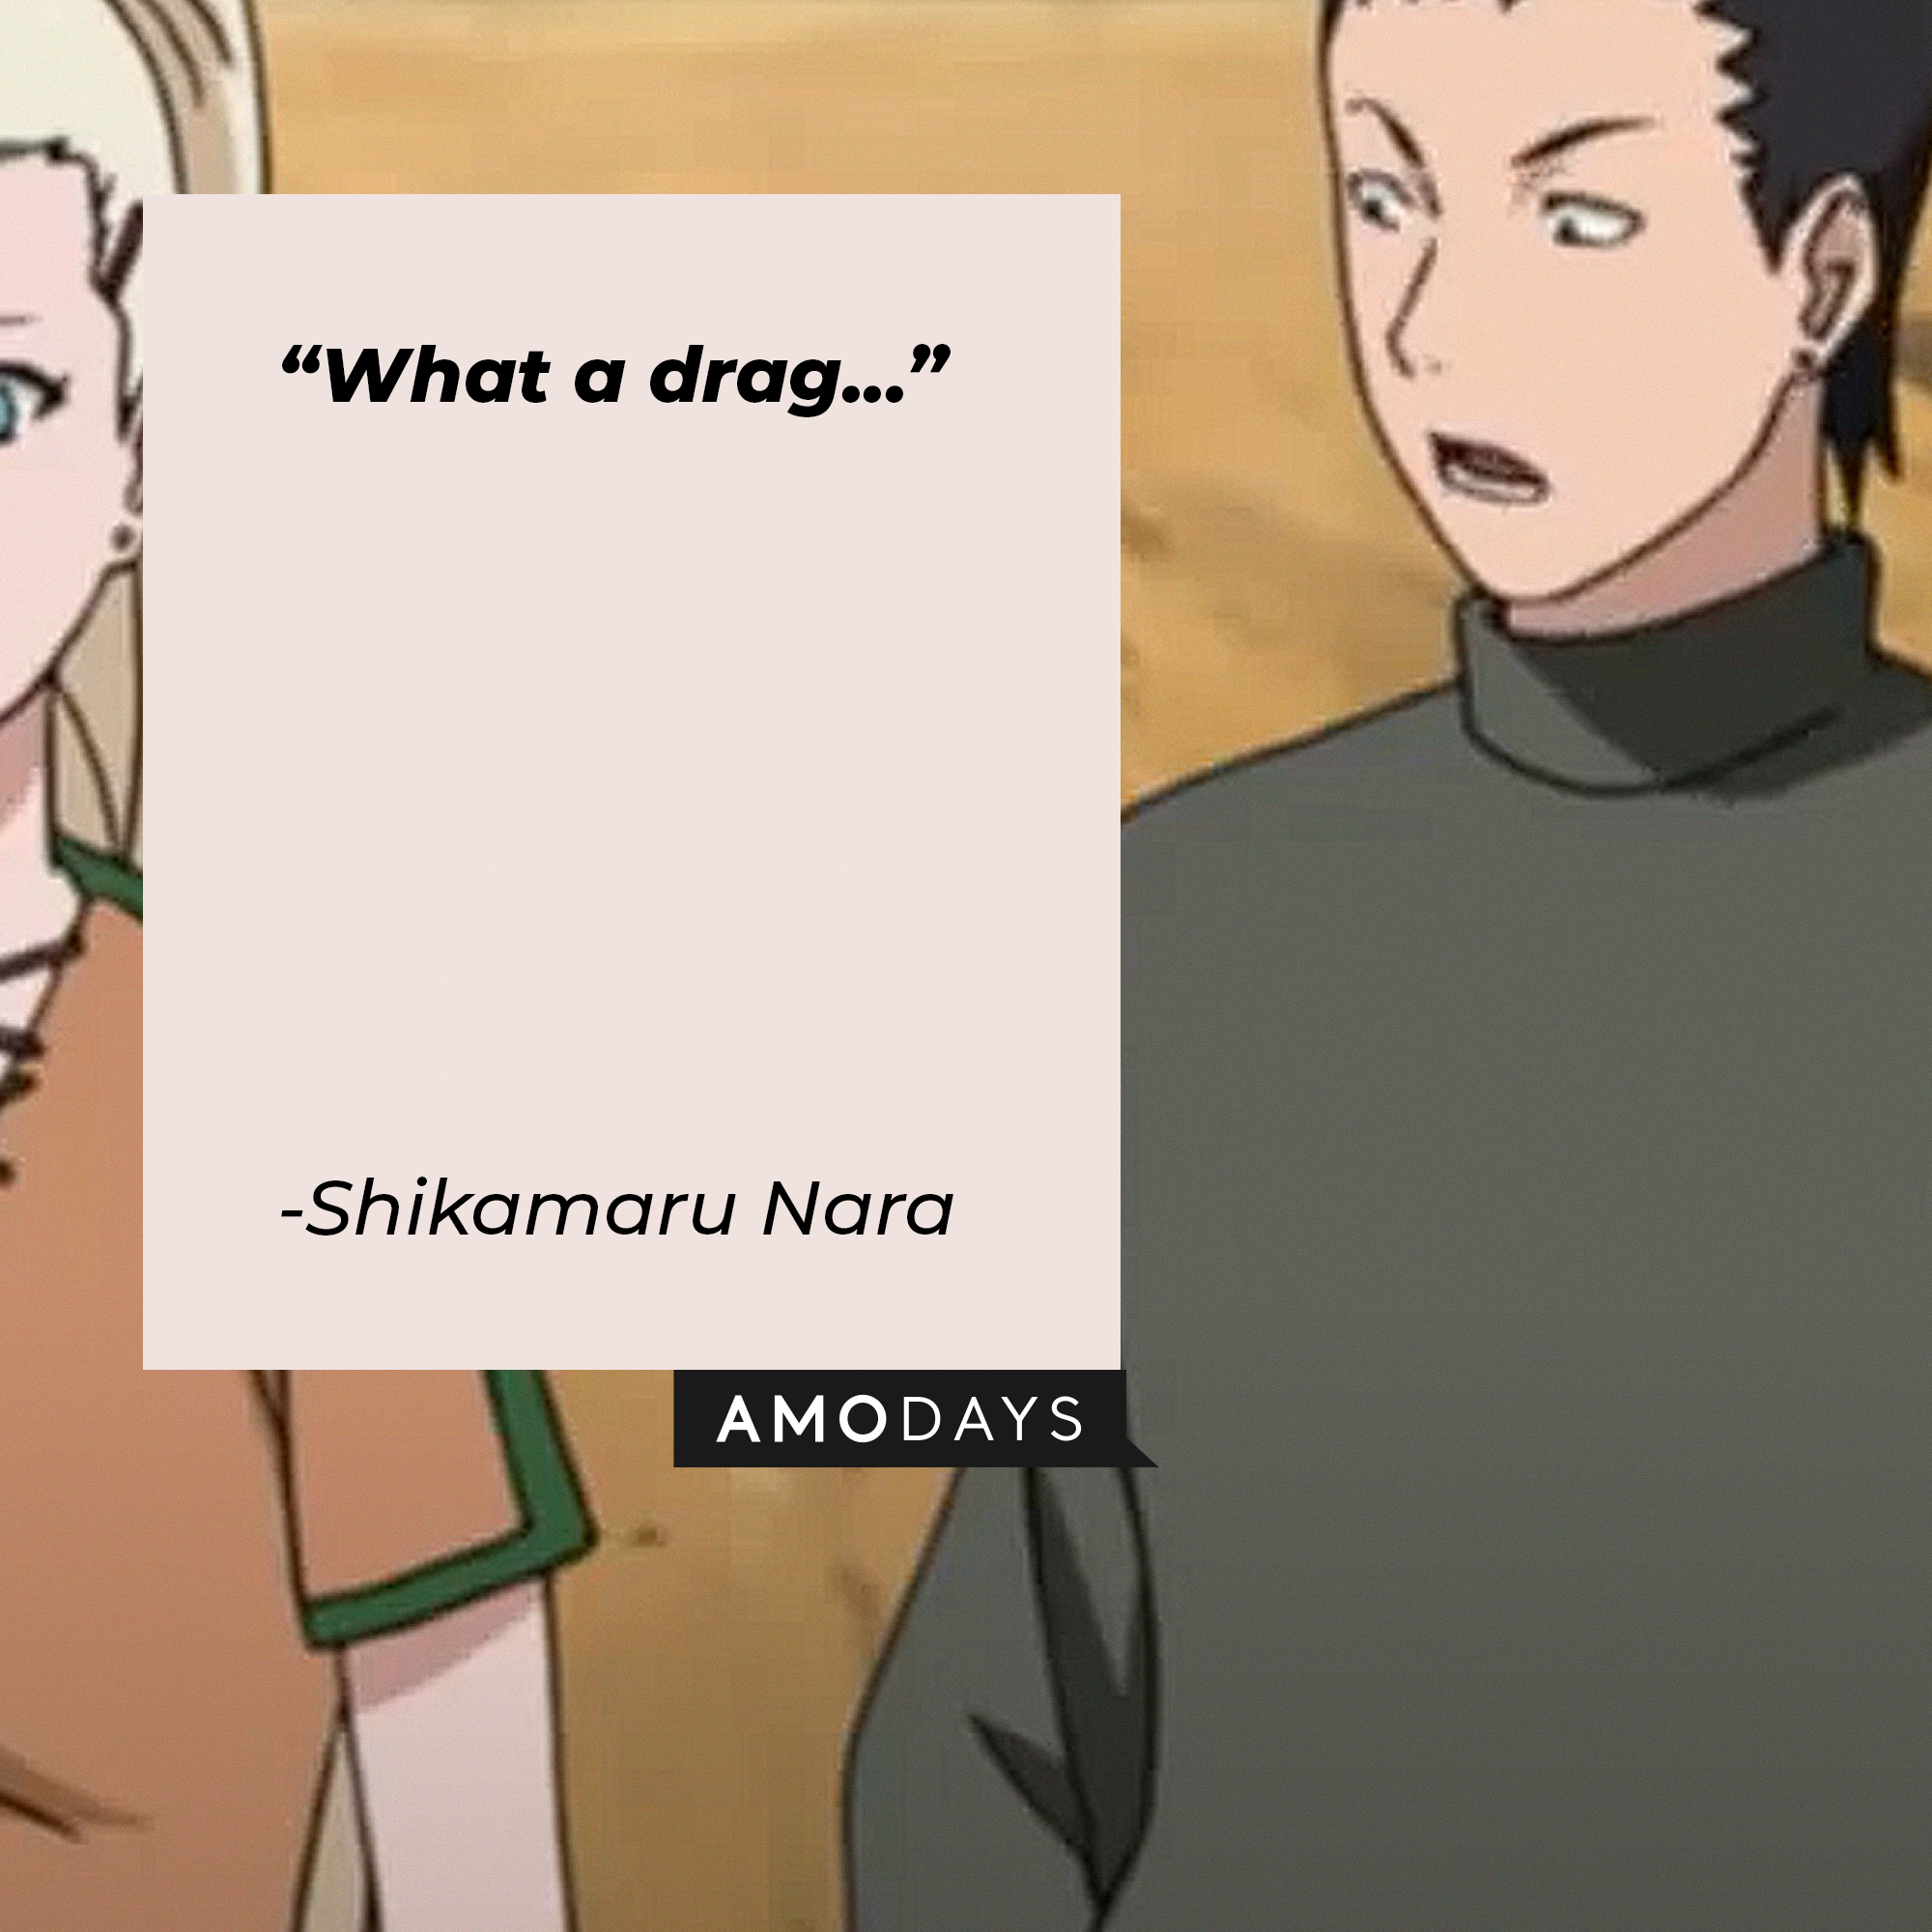 A picture of  Shikamaru Nara with the quote: "What a drag..." | Source:youtube.com/CrunchyrollCollection